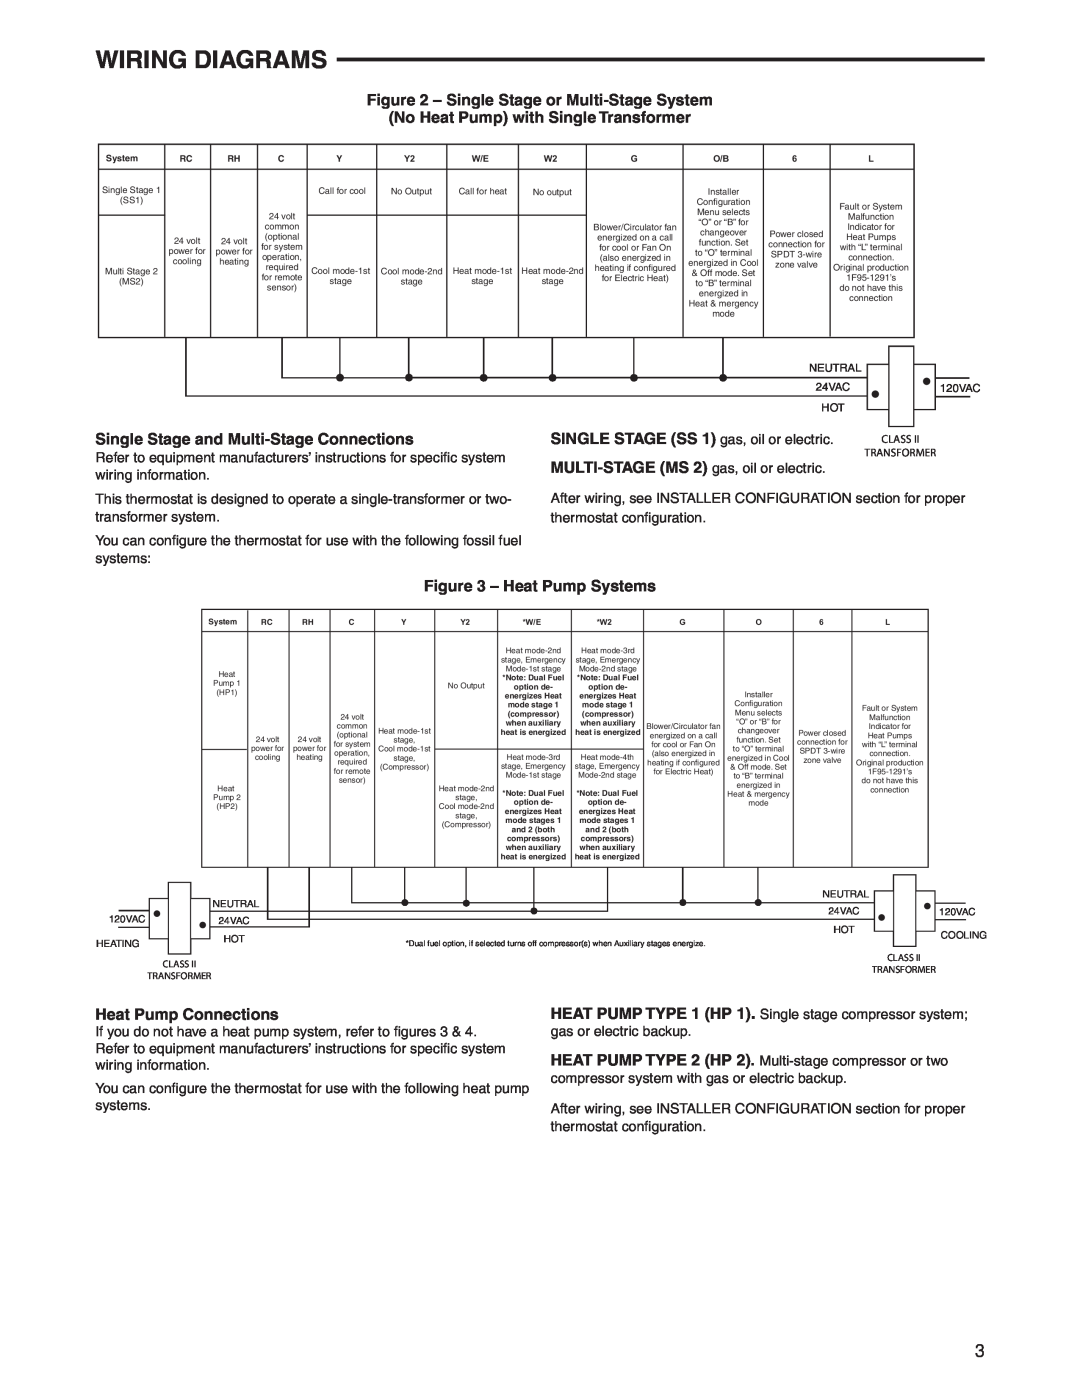 White Rodgers 1F95-1291 Wiring Diagrams, Single Stage or Multi-StageSystem, No Heat Pump with Single Transformer 